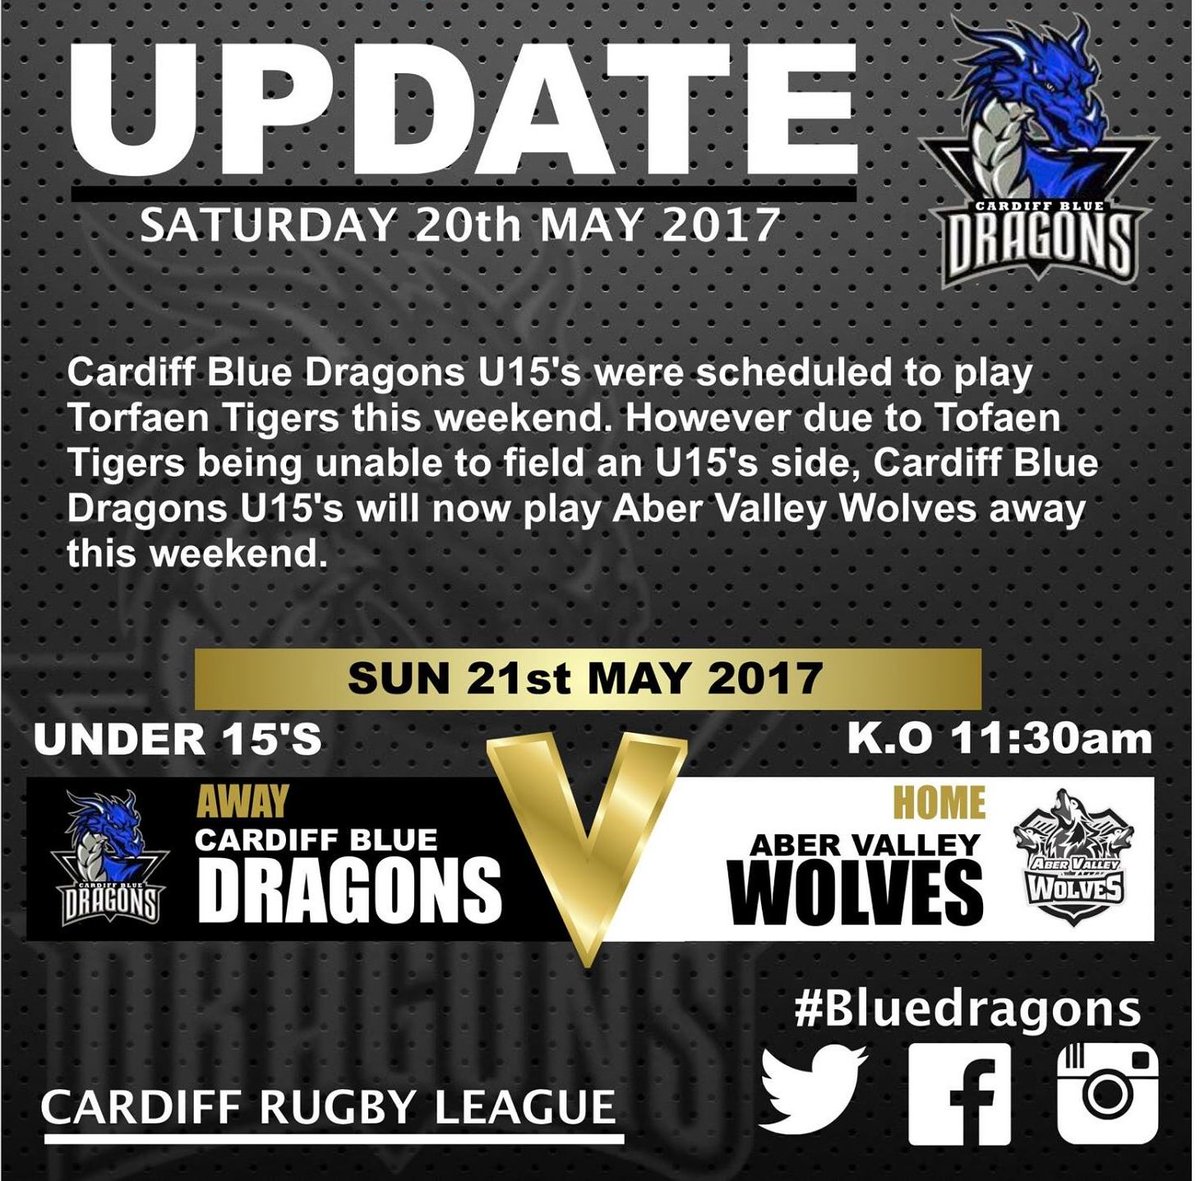 UPDATE! Under 15's will now play Aber Valley Wolves away this Sunday. #bluedragons #cardiffrugby #rugby #cardiffrugbyleague #wrl